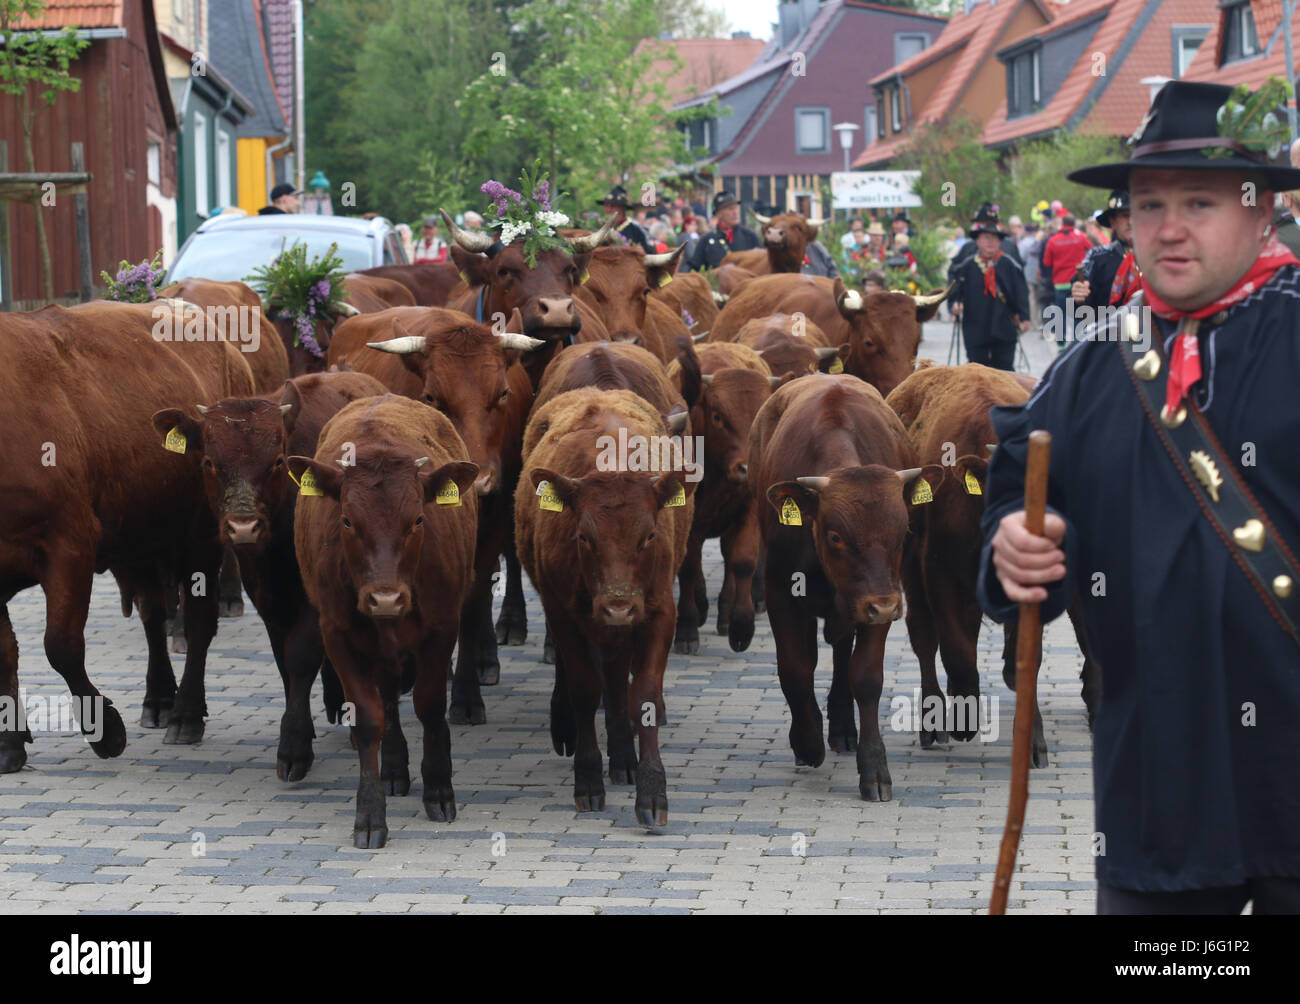 Tanne, Germany. 21st May, 2017. dpatop - Cow herders march through the town along with their cows during the traditional Cow Prom in Tanne, Germany, 21 May 2017. The Cow Prom took place under a sunny weather and with many spectators in the small town of Tanne in the Harz mountains. More than 20 cows with colourful head-dresses executed on Sunday a large procession through the town along with their owners. Photo: Matthias Bein/dpa-Zentralbild/dpa/Alamy Live News Stock Photo